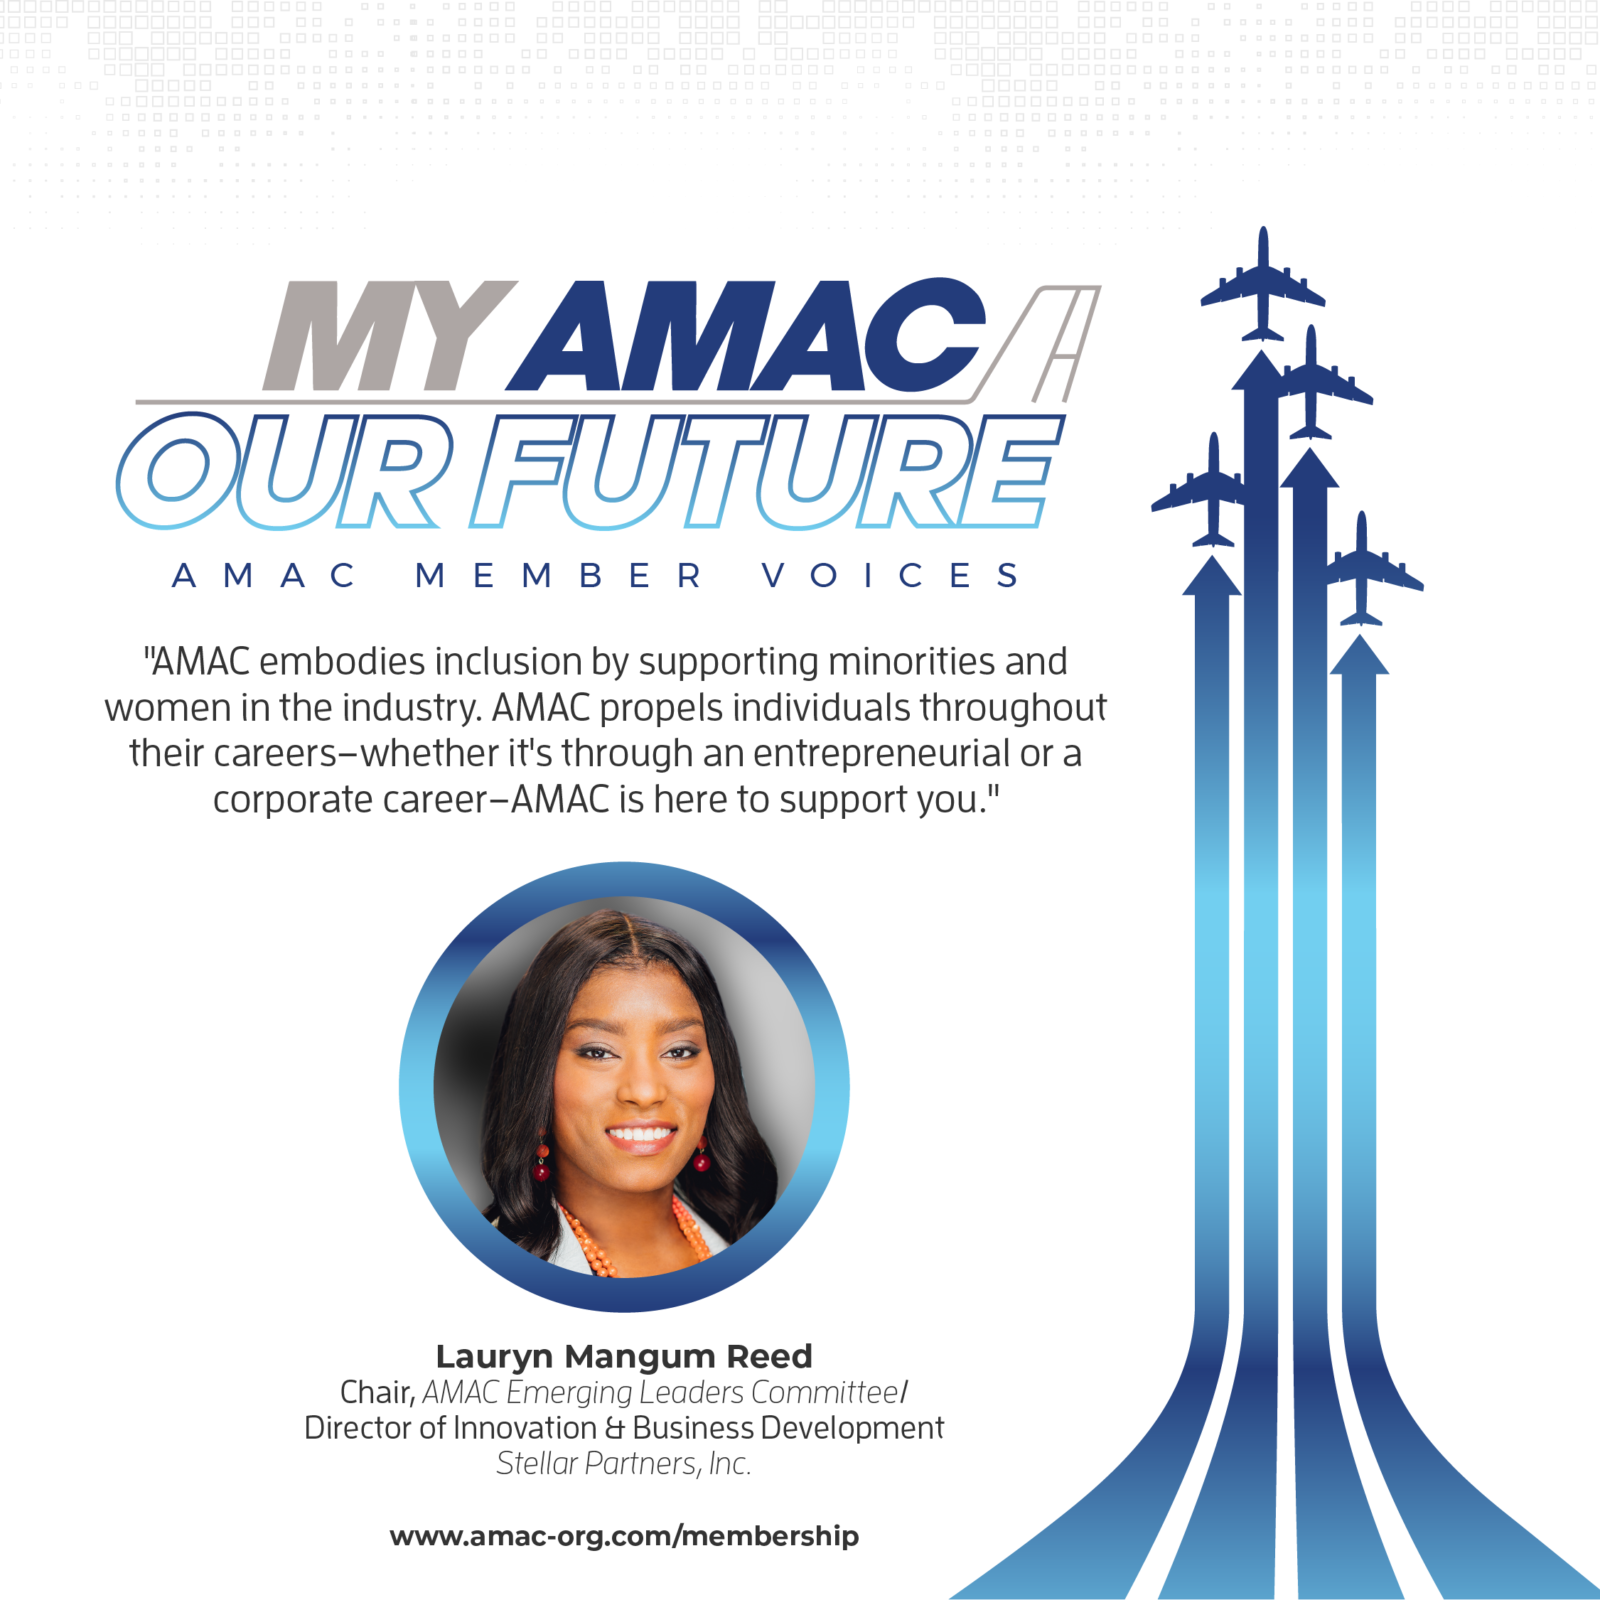 My AMAC Our Future_SM_Reed_IG